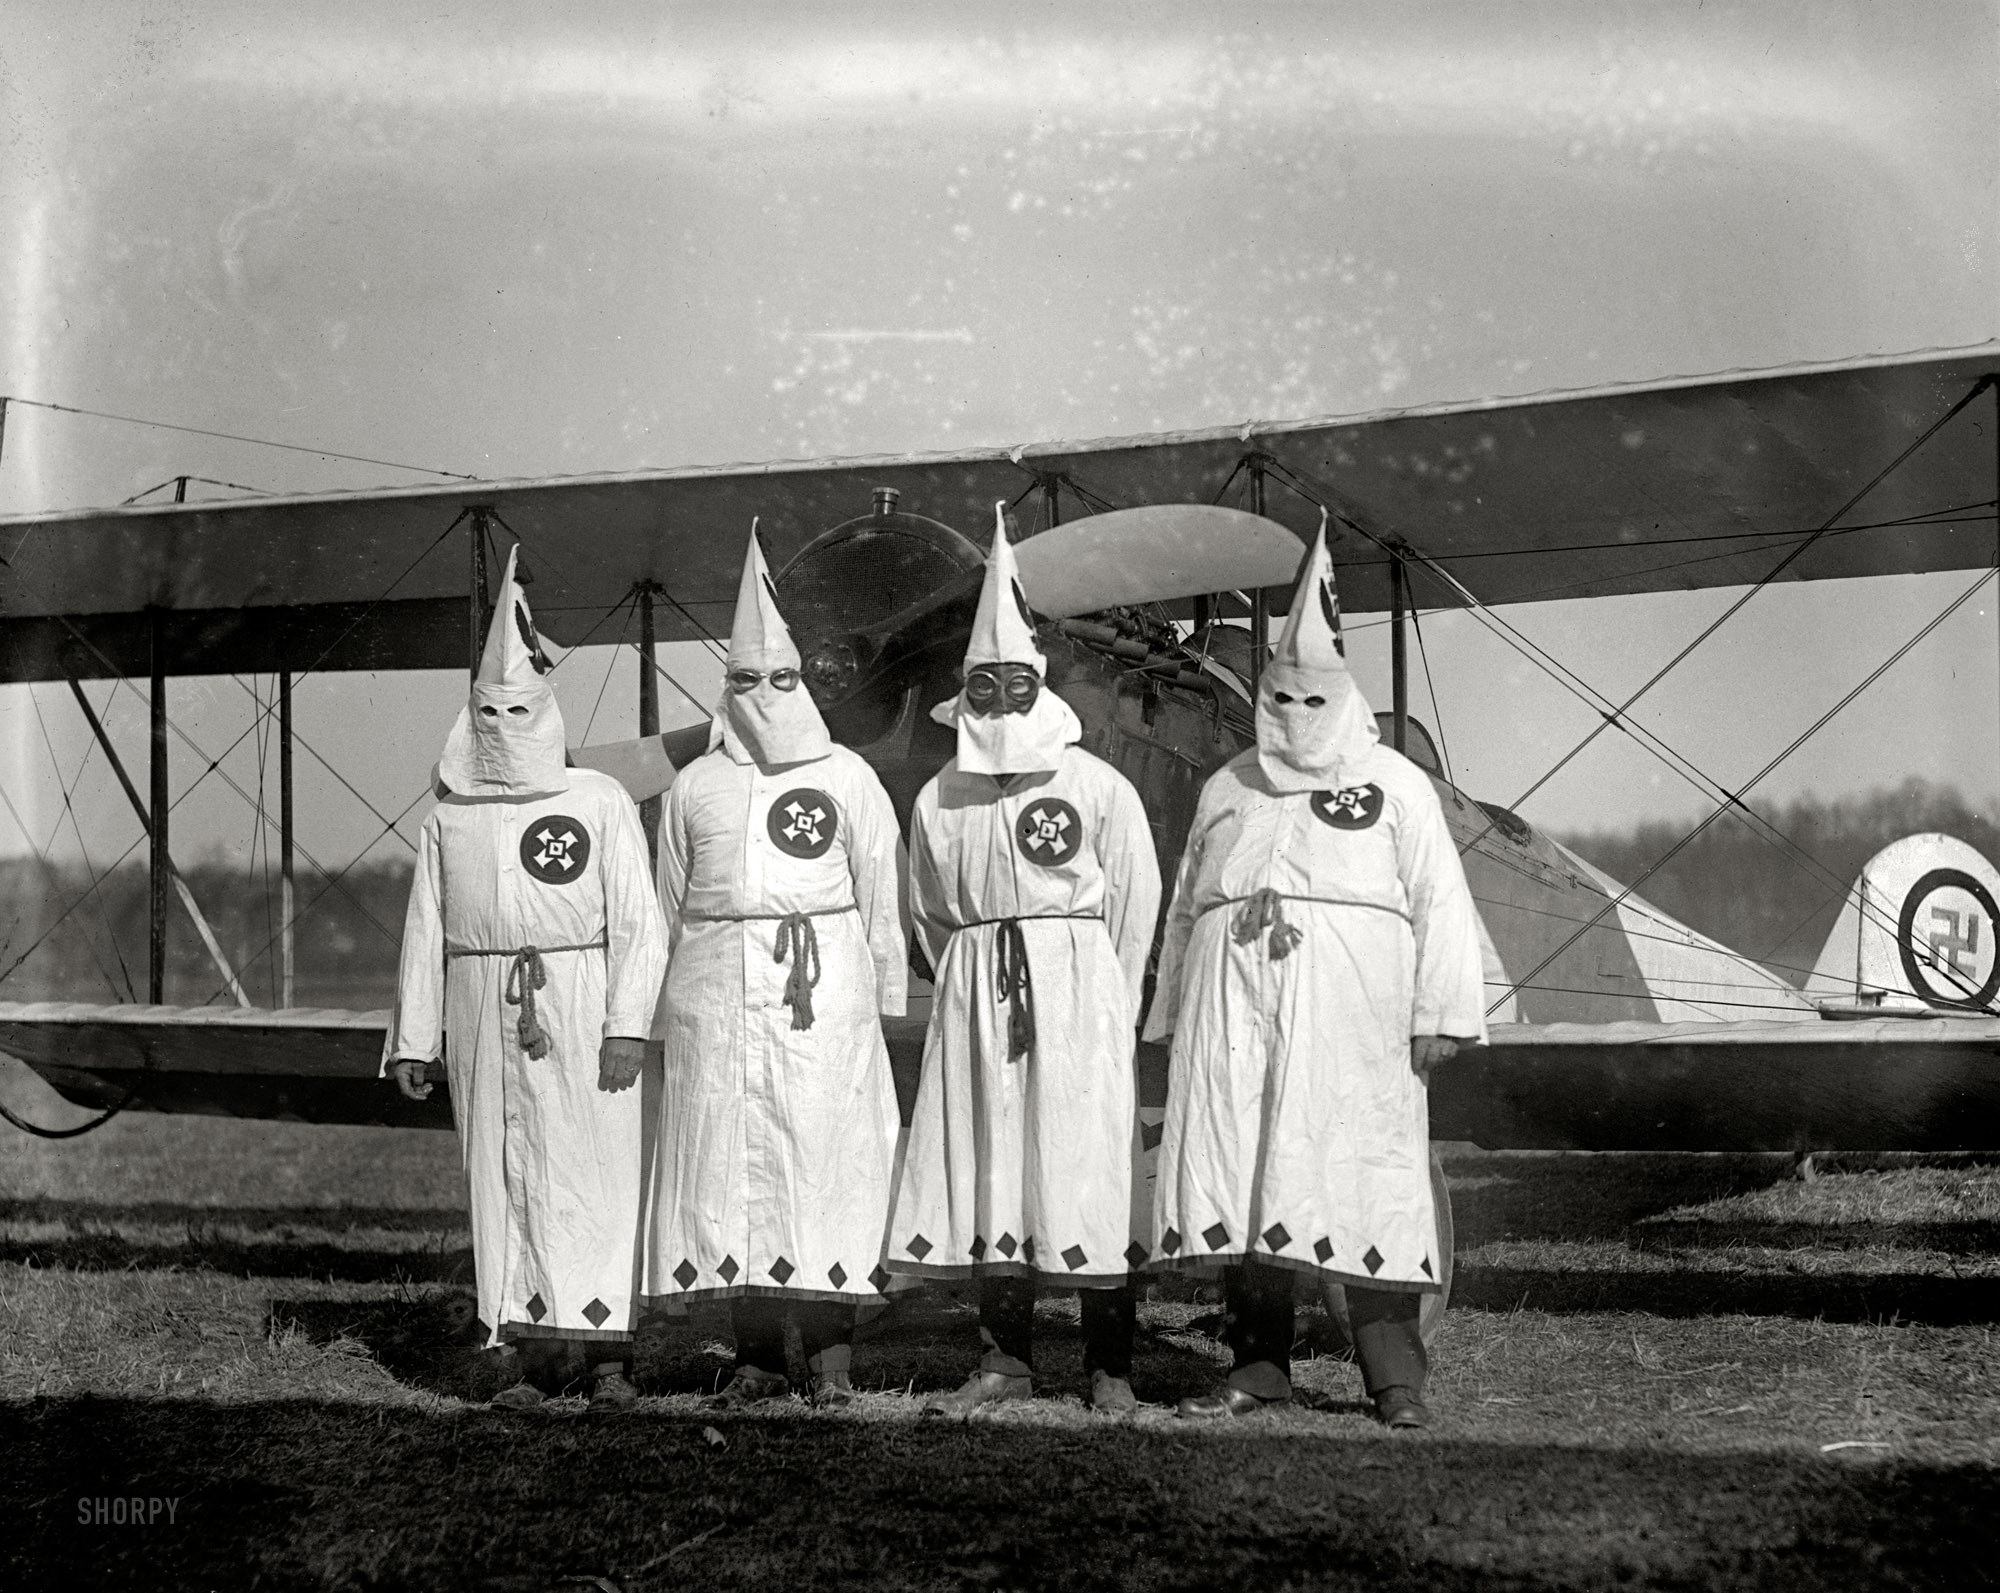 March 18, 1922. "Members of the Ku-Klux-Klan about to take off with the literature which was scattered over the suburbs of the city." The date coincides with a Klan parade through Washington's Virginia suburbs. View full size.